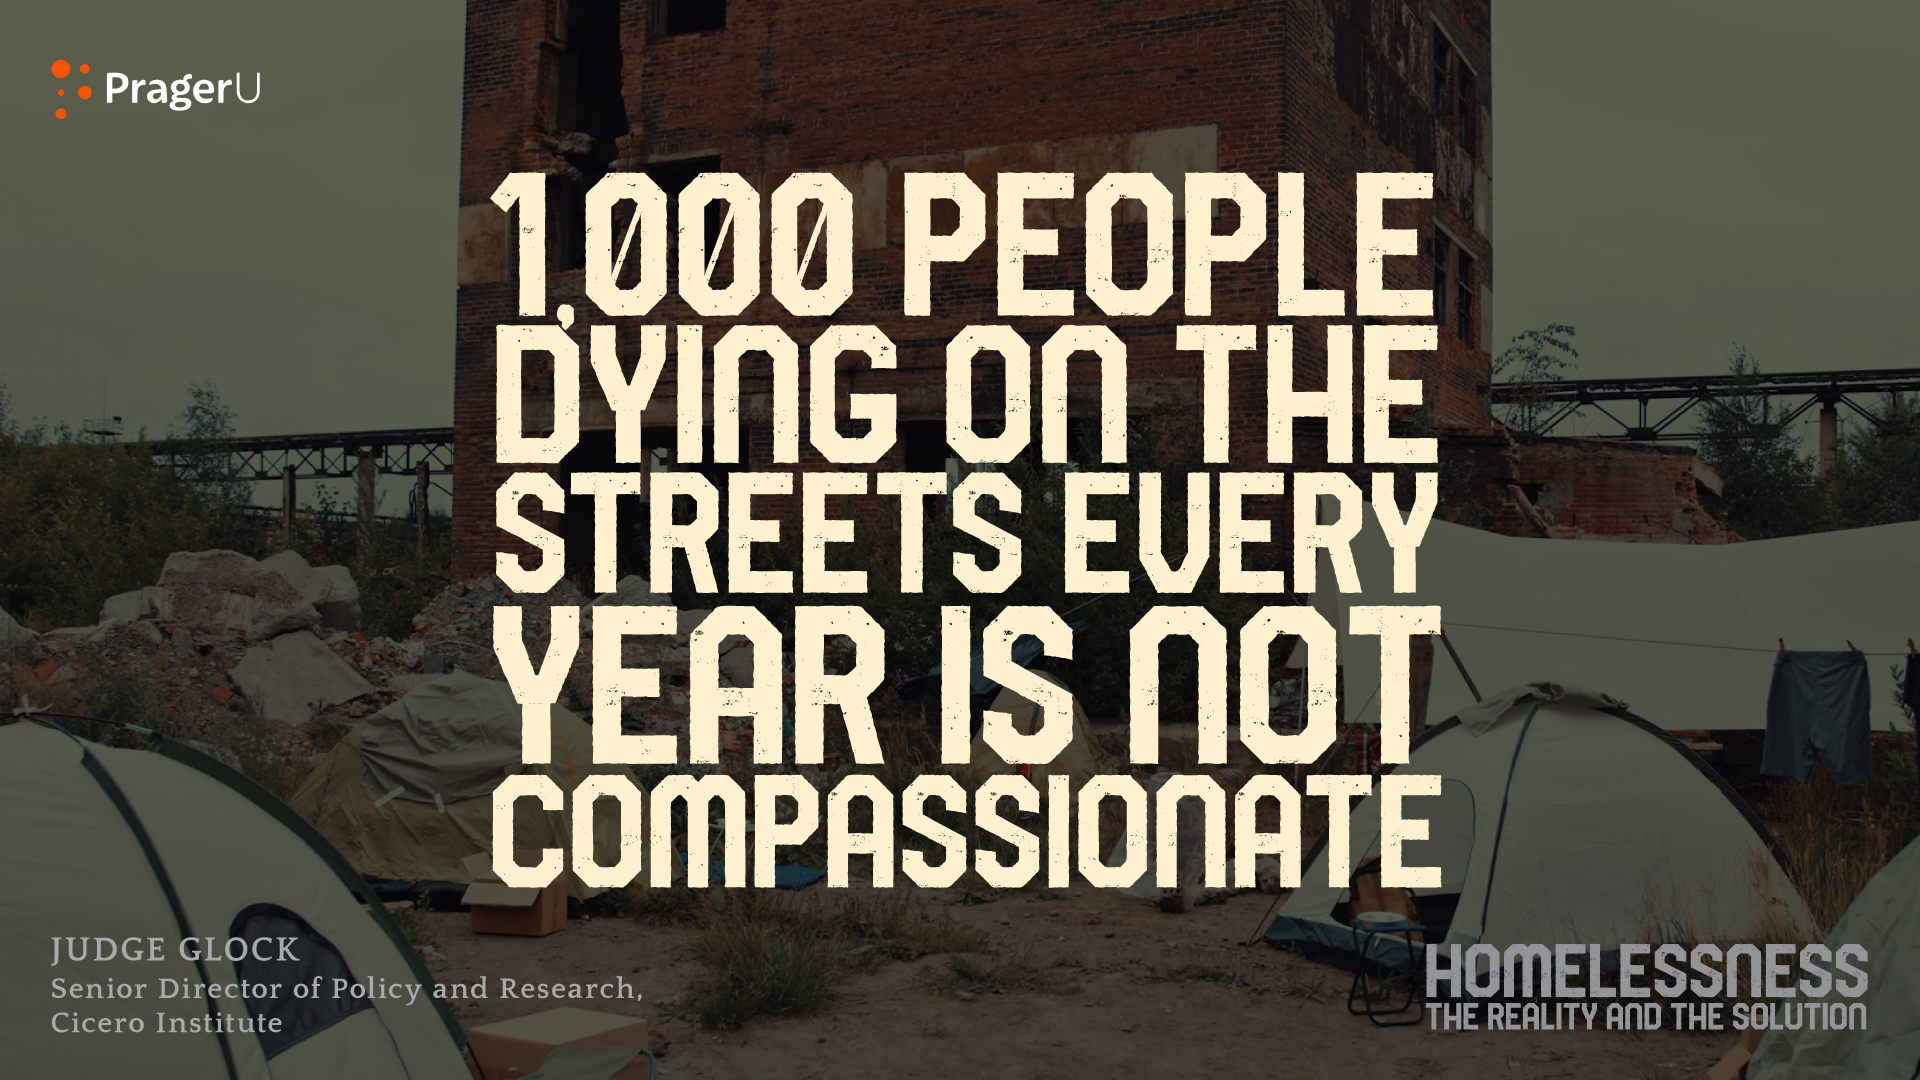 1,000 People Dying on the Streets Every Year Is Not Compassionate